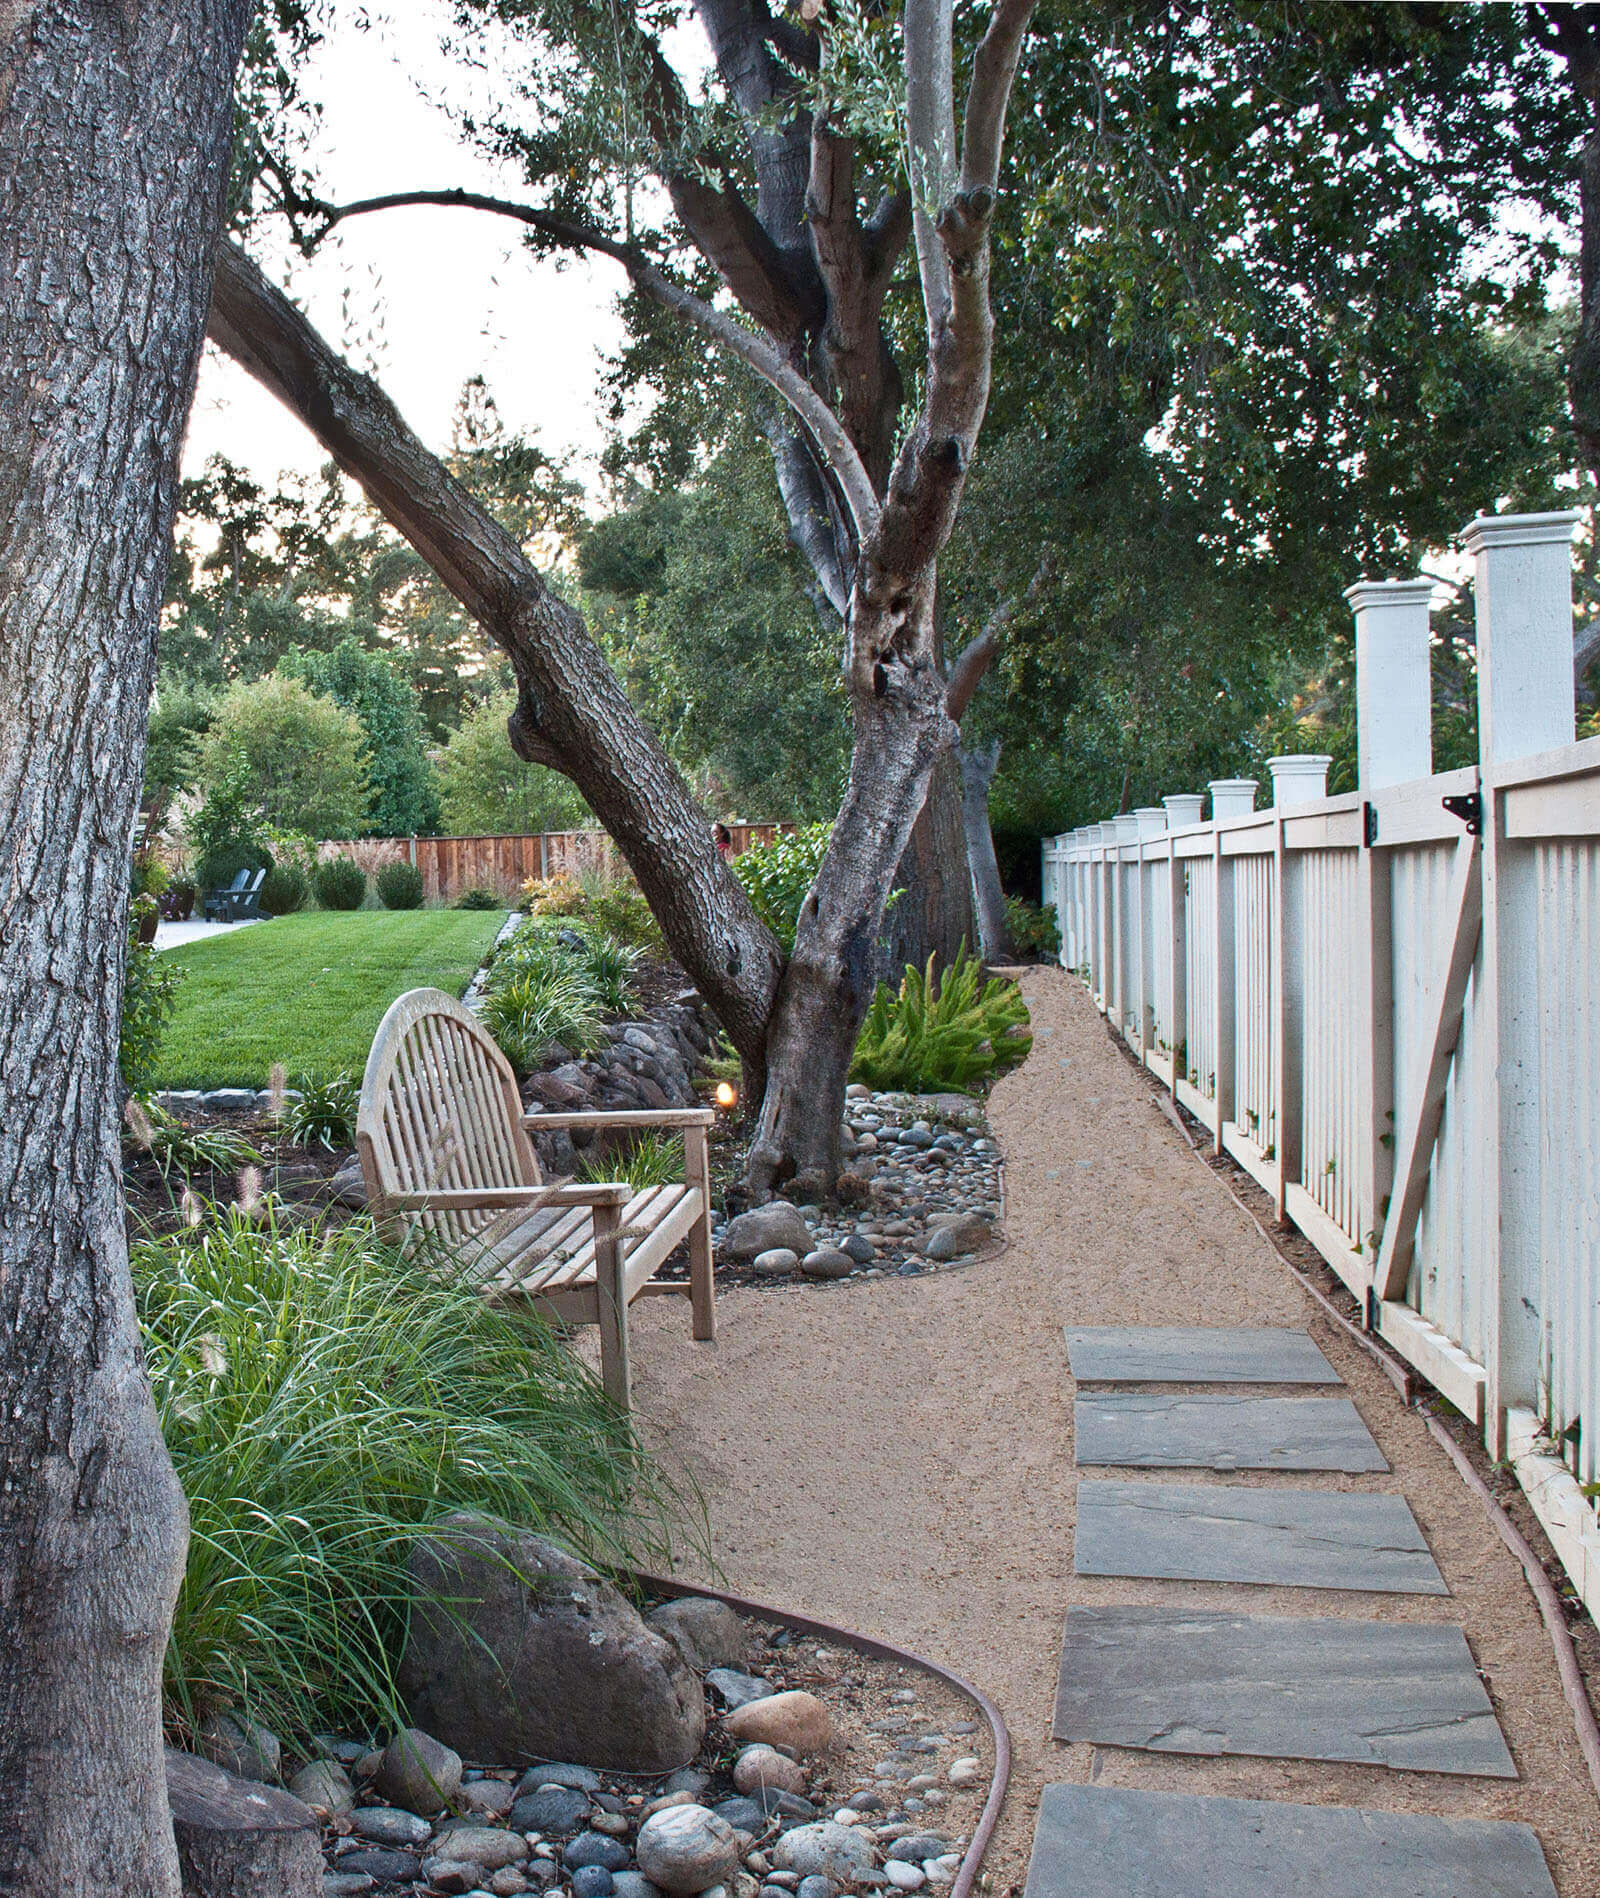 Pathway - Deitz - skinny gravel pathway with stone tiles leading around the yard, with resting bench